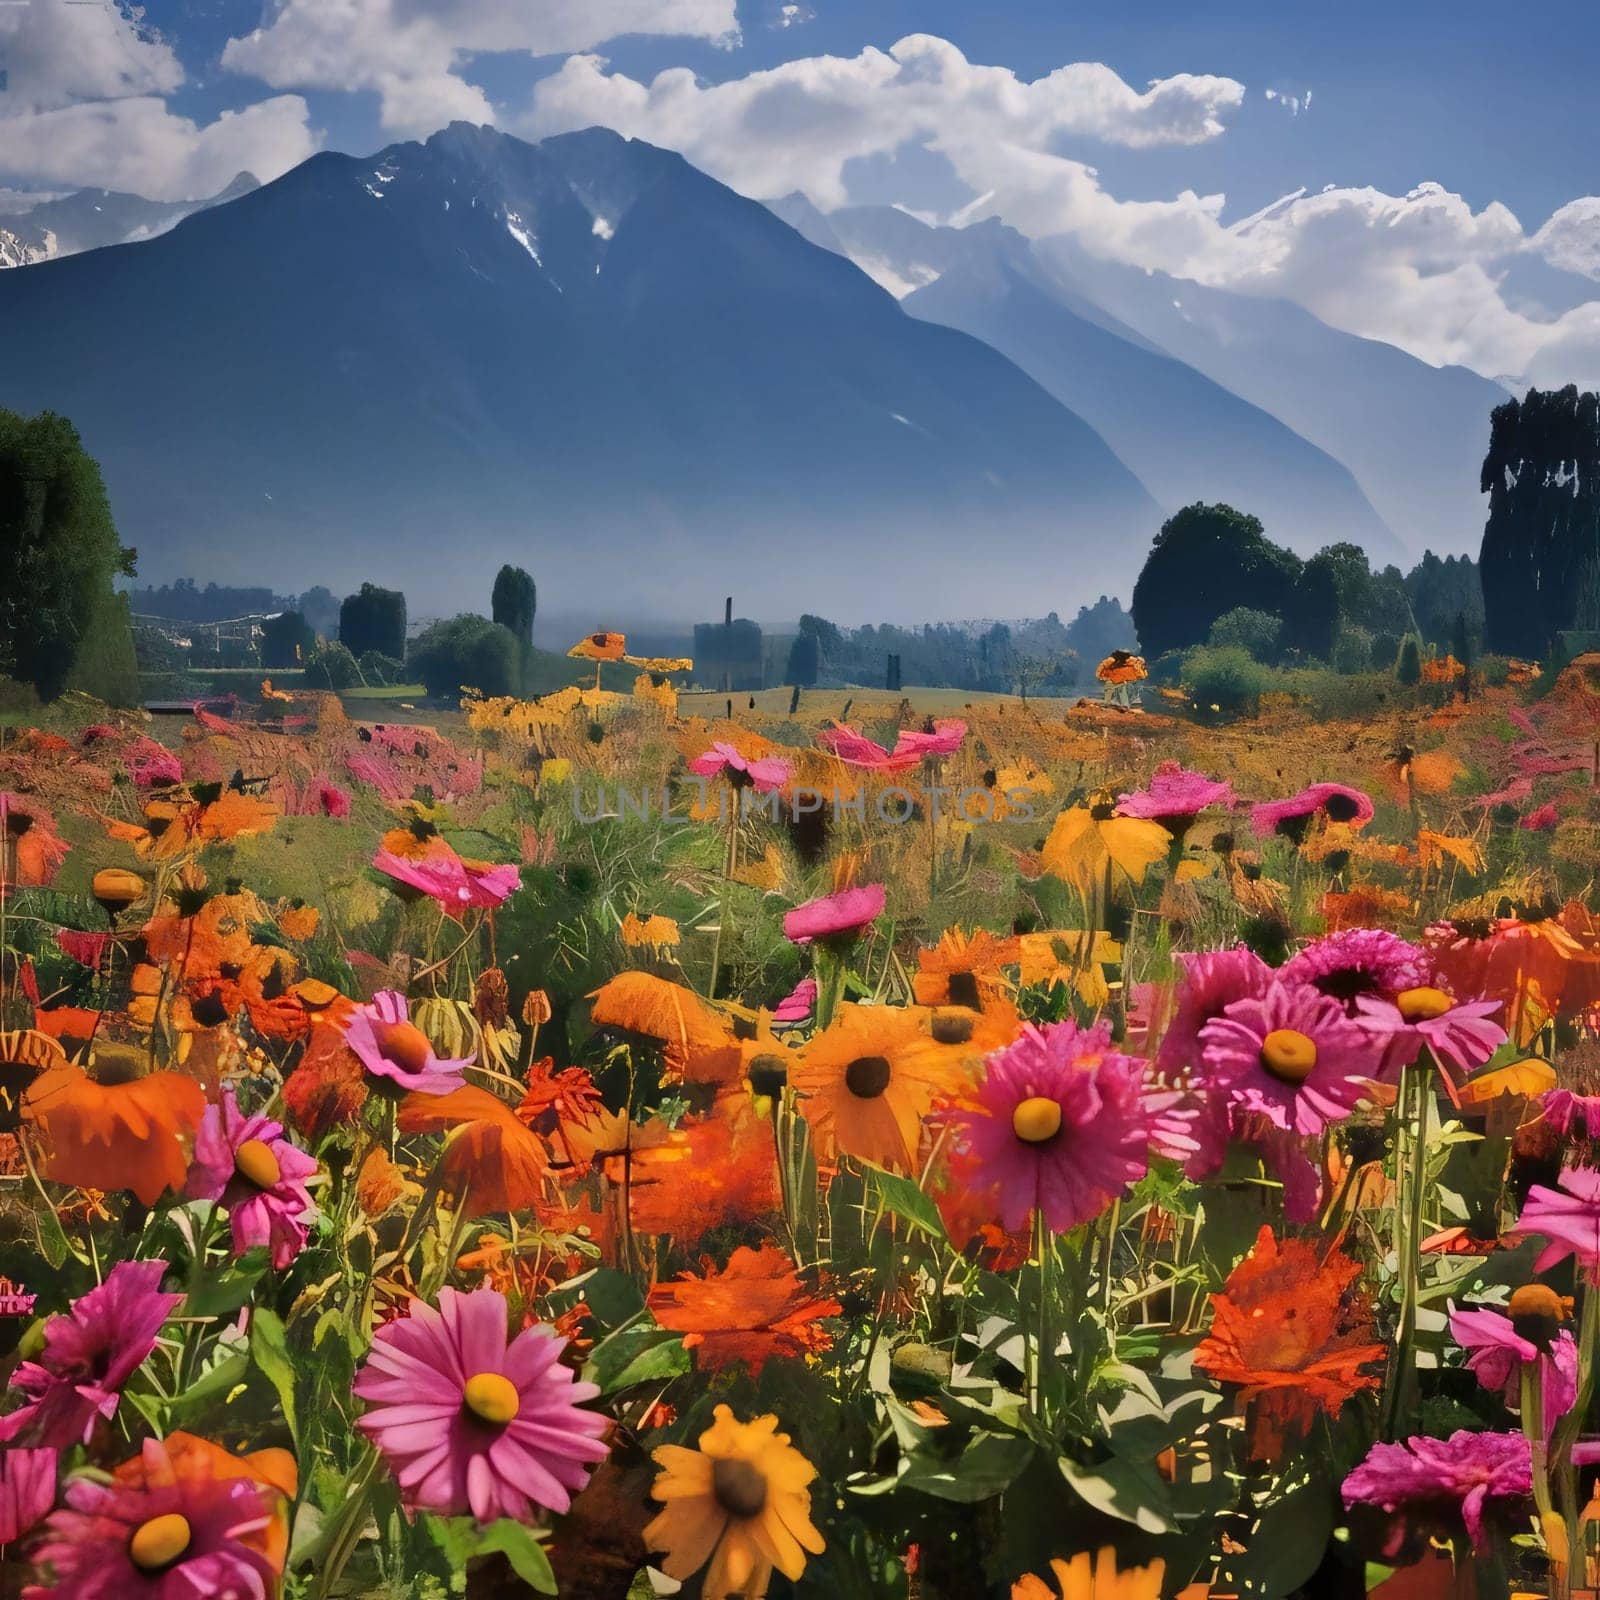 Pink, orange, white flowers in a clearing, mountains in the background. Flowering flowers, a symbol of spring, new life. A joyful time of nature waking up to life.